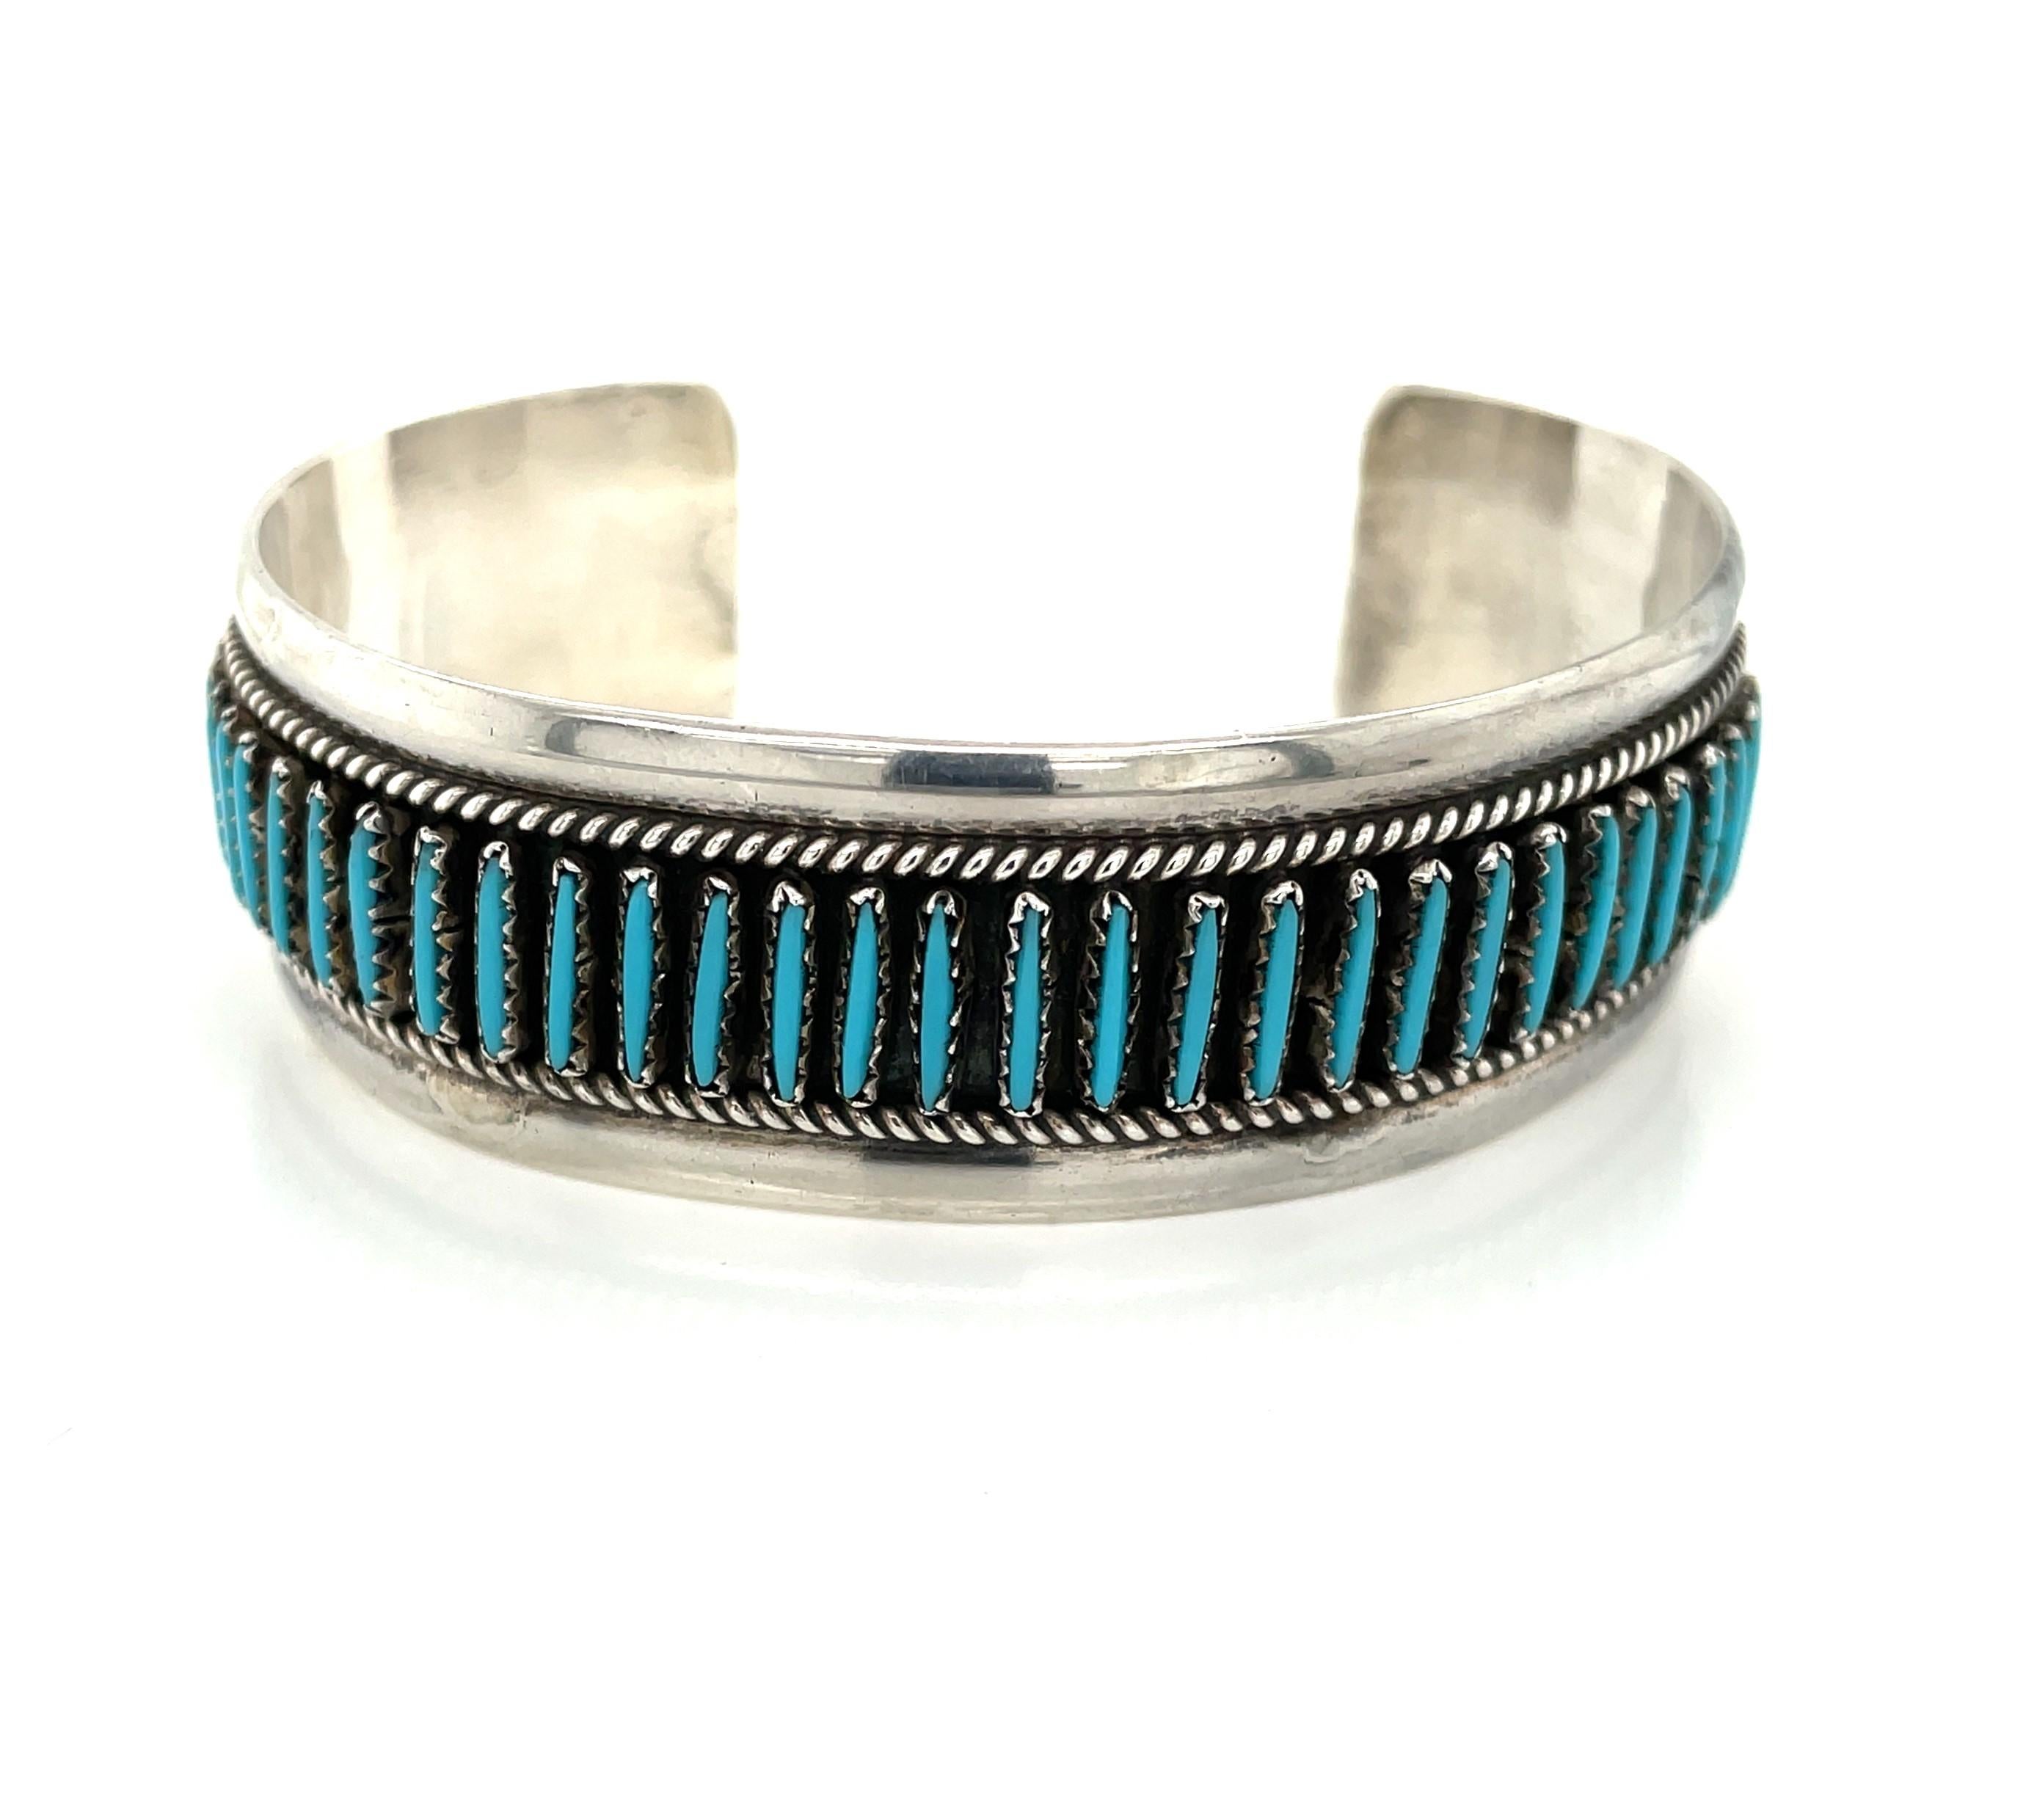 Turquoise needlepoint accents highlighted by a twisted silver rope detailing decorate the front placket of this sterling silver South West style cuff bracelet. Of a medium 3/4 inch width, this piece is a great casual accessory on it's own or as a